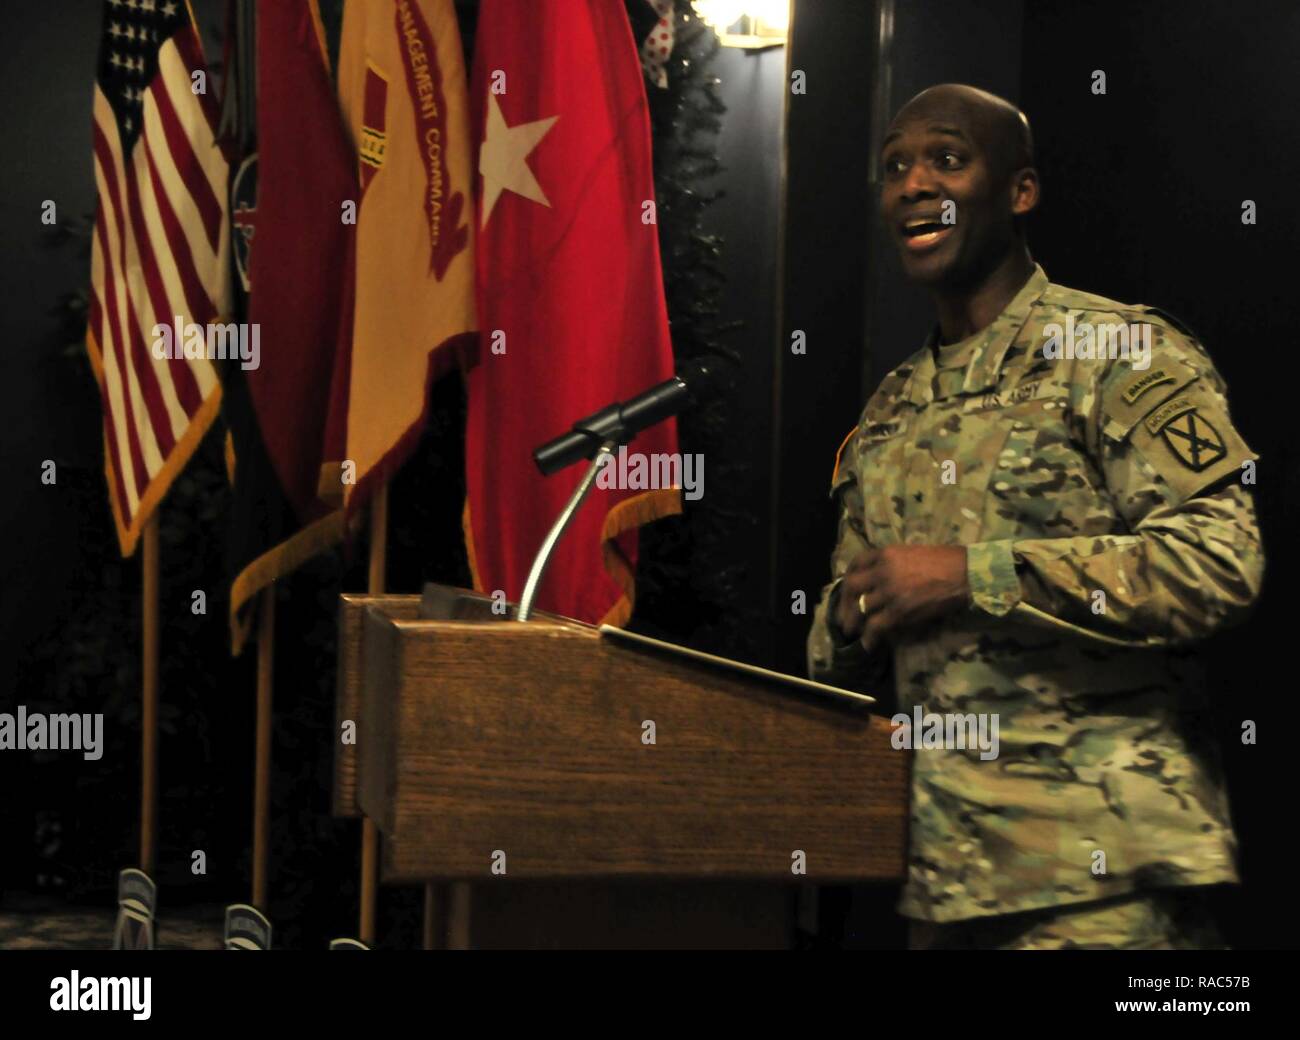 Brig. Gen. Xavier Brunson, 10th Mountain Division (LI) Deputy Commanding General, addresses approximately 200 Soldiers and members of the Fort Drum community at an observance honoring Dr. Martin Luther King Jr. at the Commons on January 11, 2017. Brunson highlighted King's message and achievements, urging Soldiers and the community to continue his work. Stock Photo